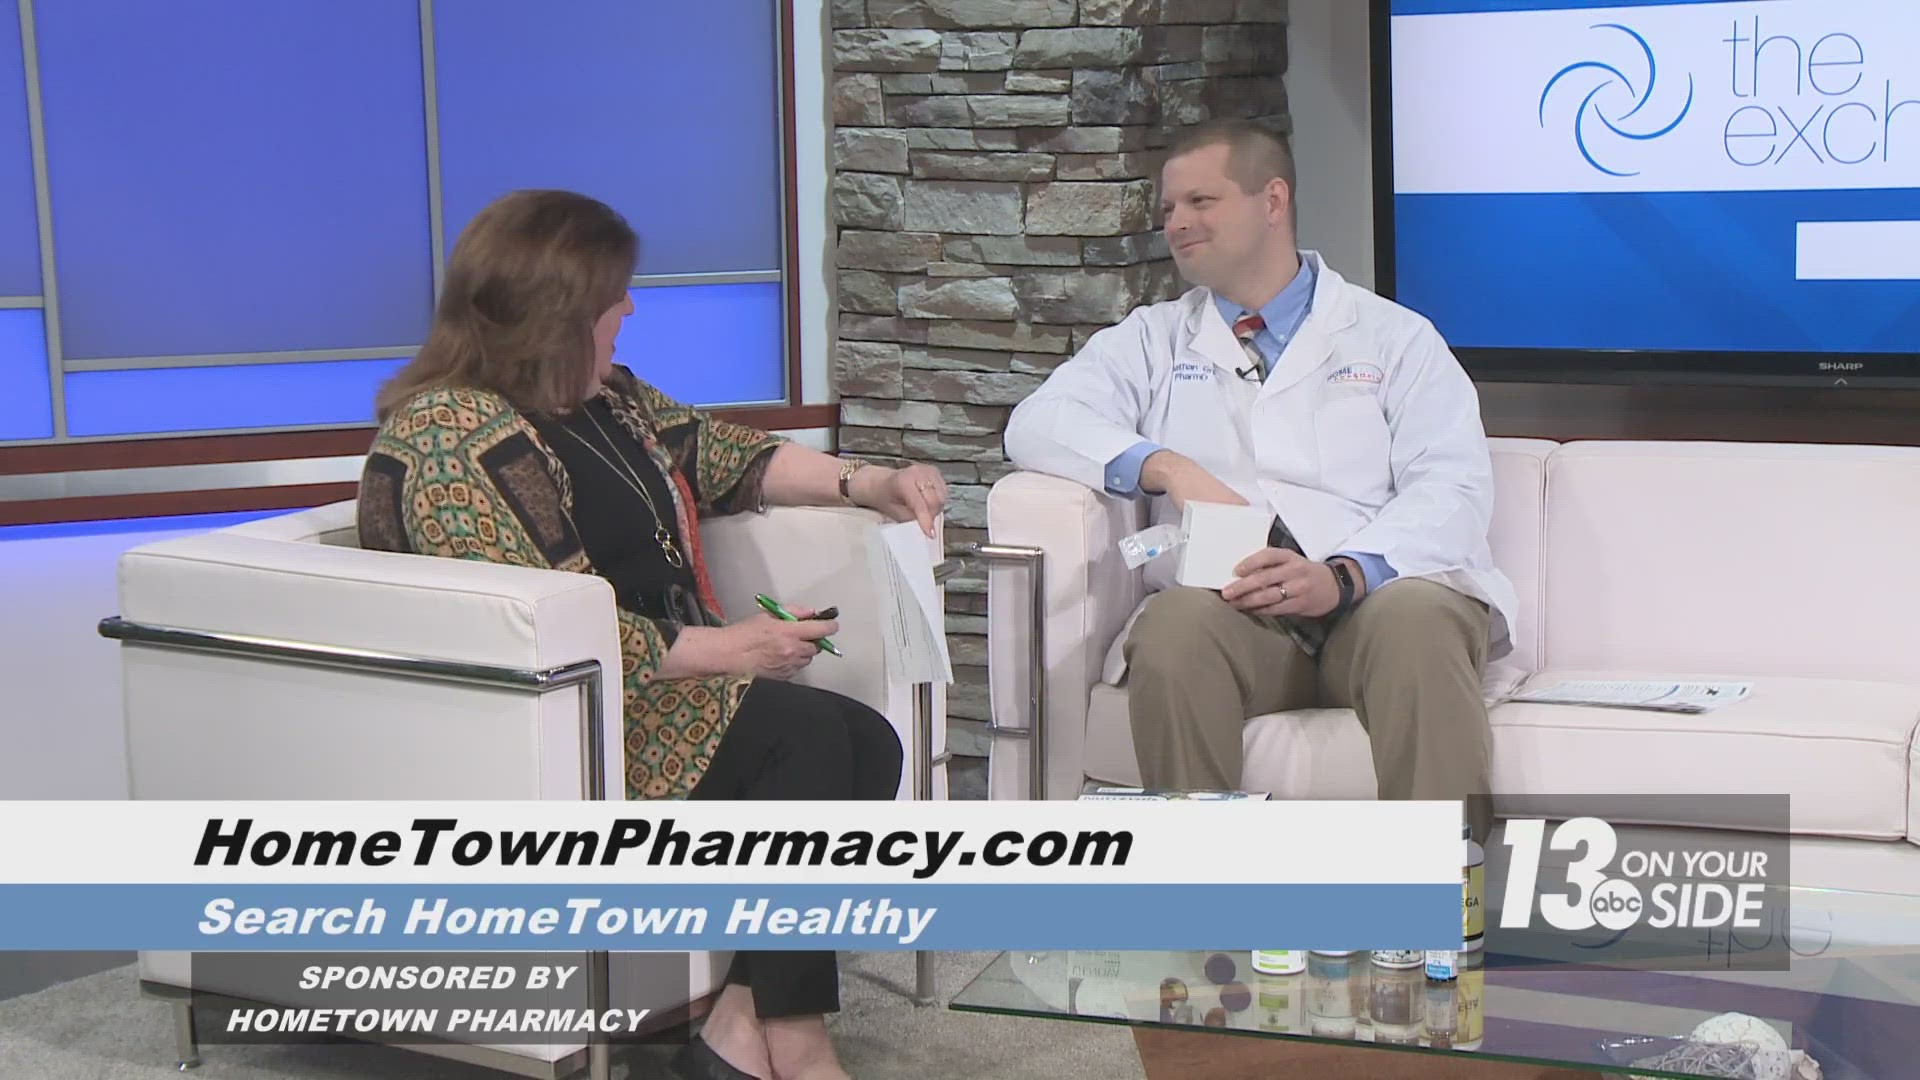 HomeTown Pharmacy is invested in each patient’s unique needs with its HomeTown Healthy program, a functional medicine approach to health care.